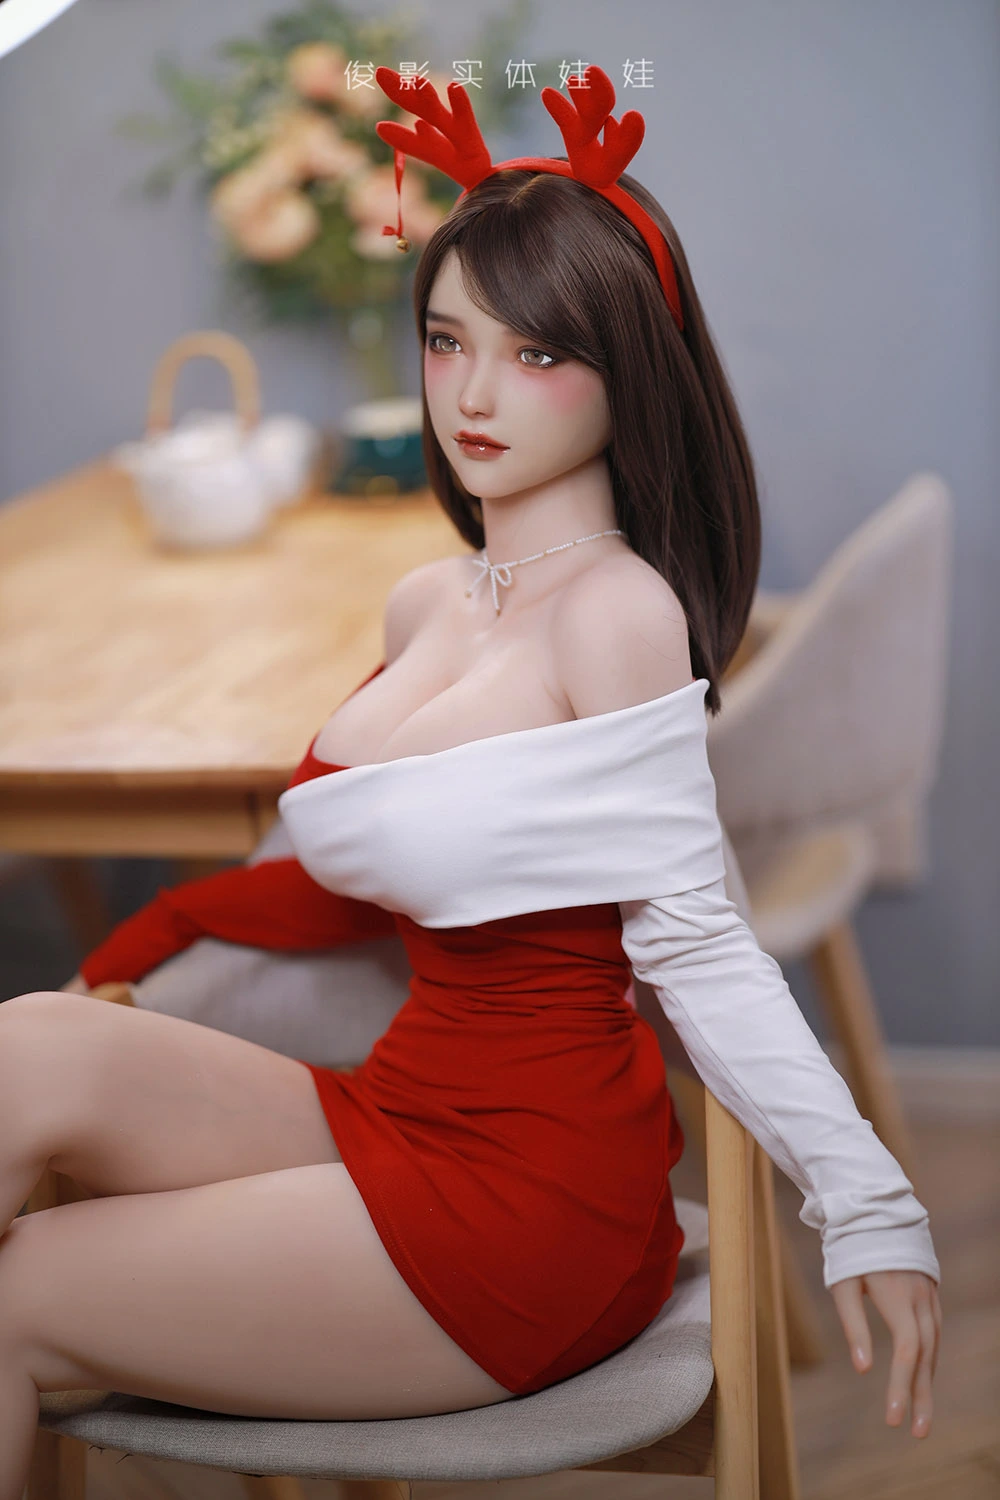 Animated sex doll